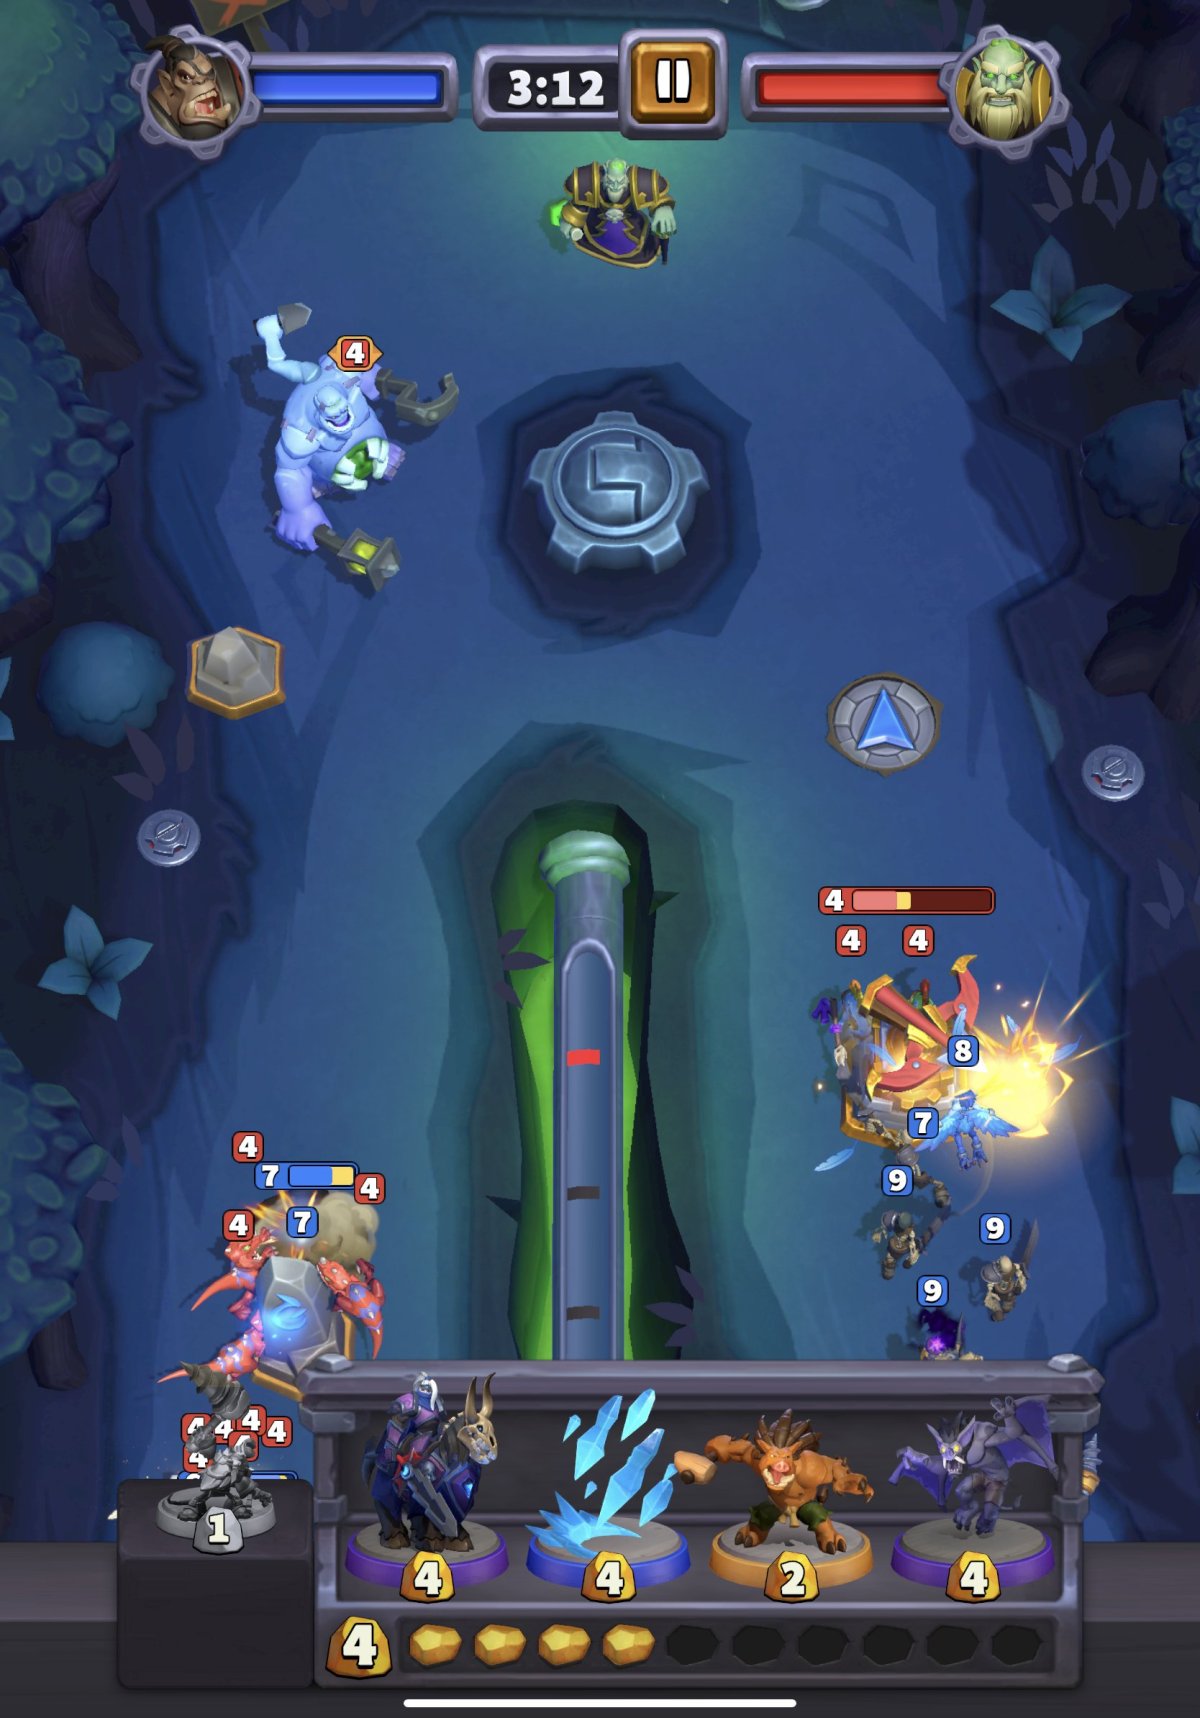 An image from Warcraft Rumble showing an attack on the different lanes of the game as part of a guide on how to beat Abercrombie in the game.